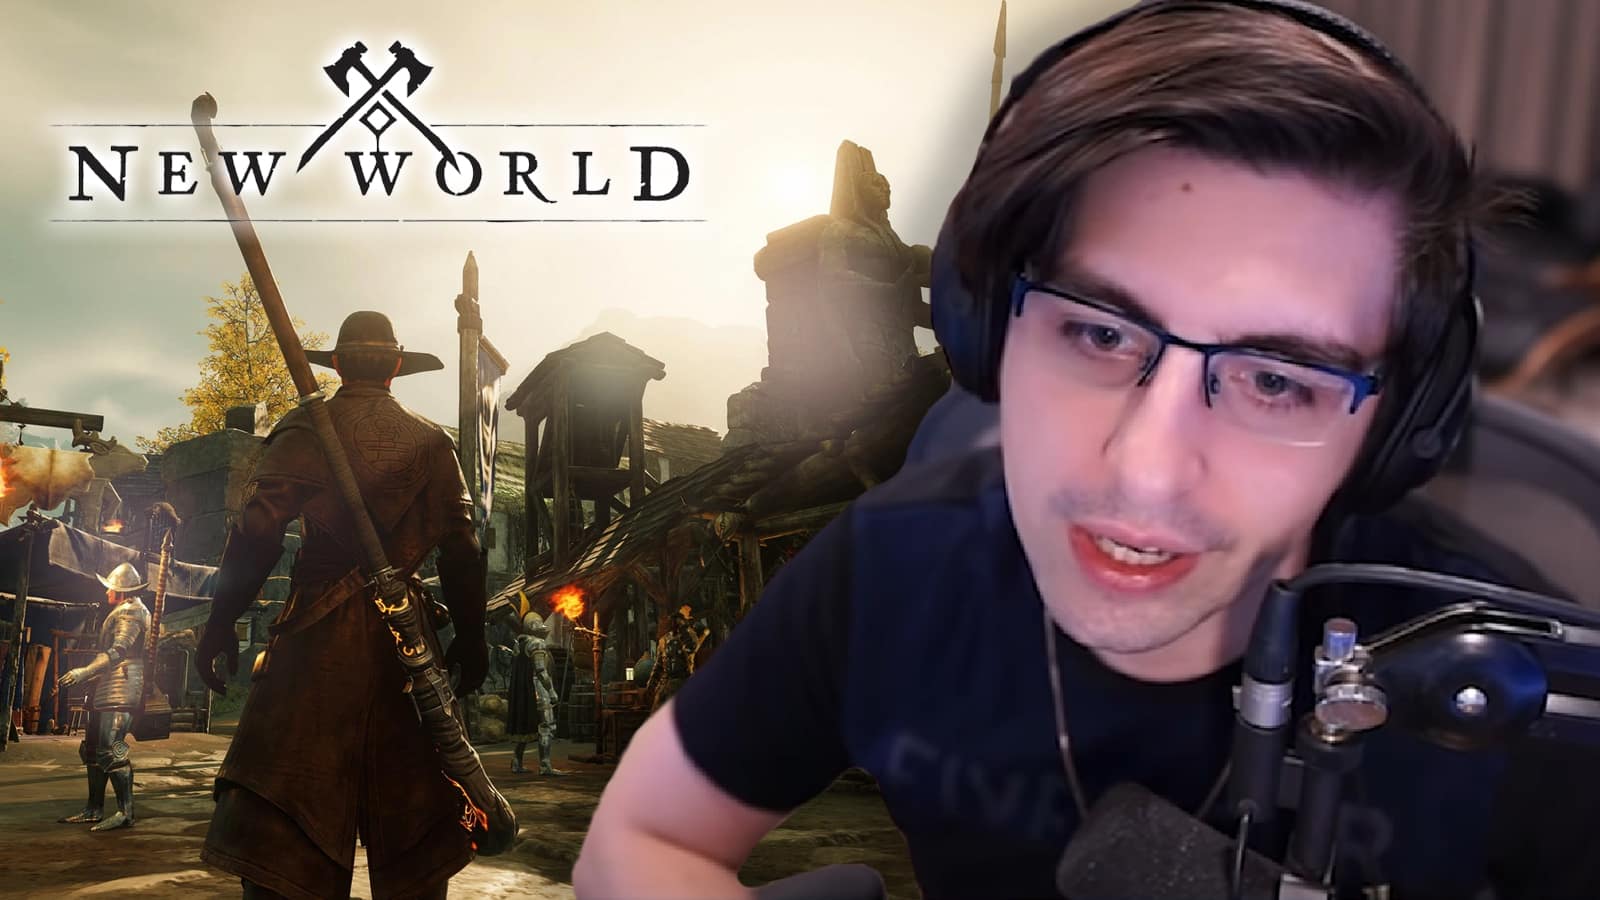 Shroud is concerned New World beta may have "burned out" players before launch